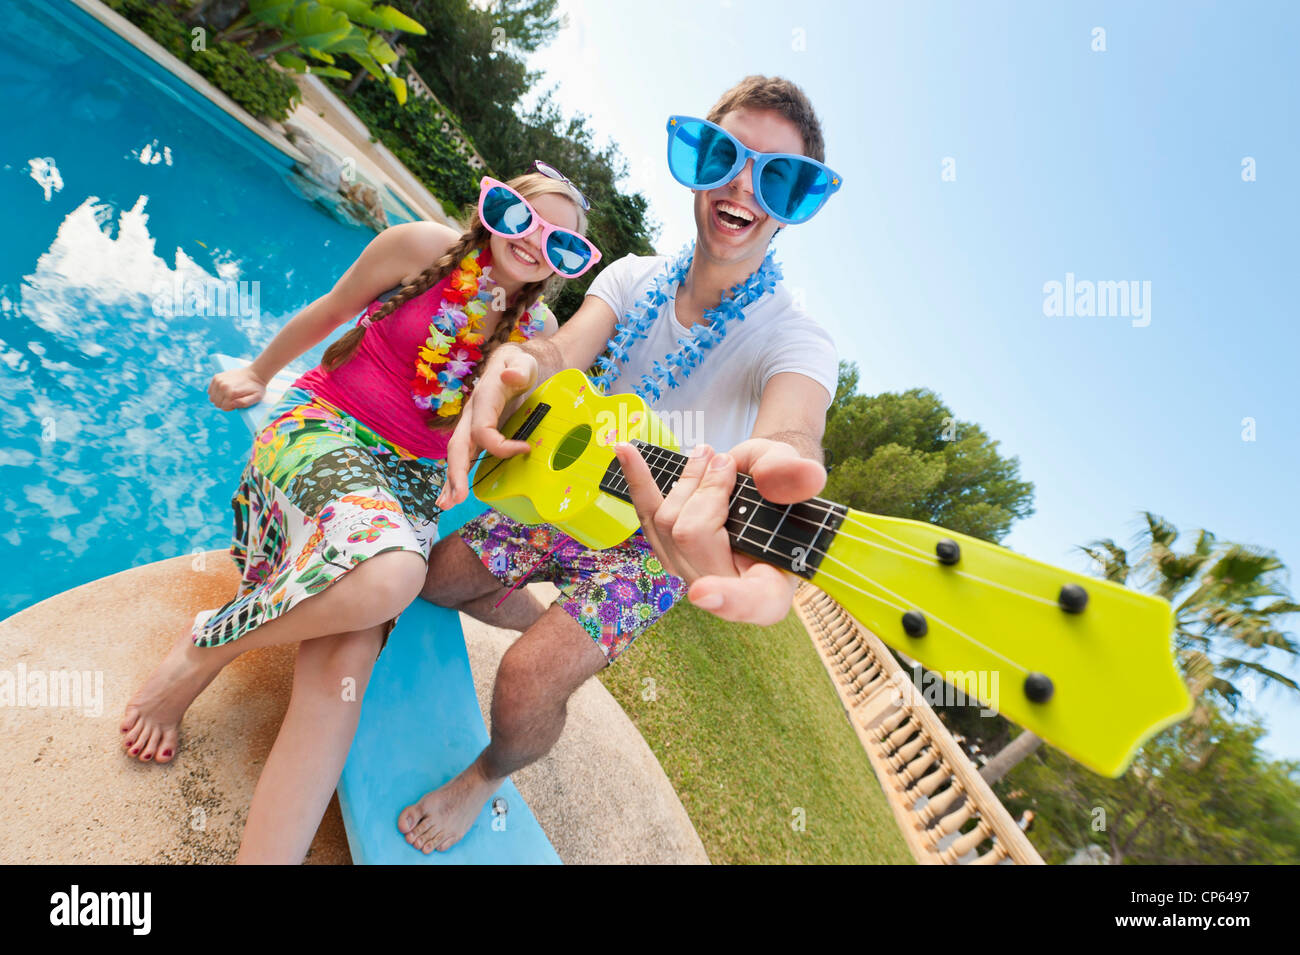 Spain, Mallorca, Couple playing on swimming pool, smiling Stock Photo